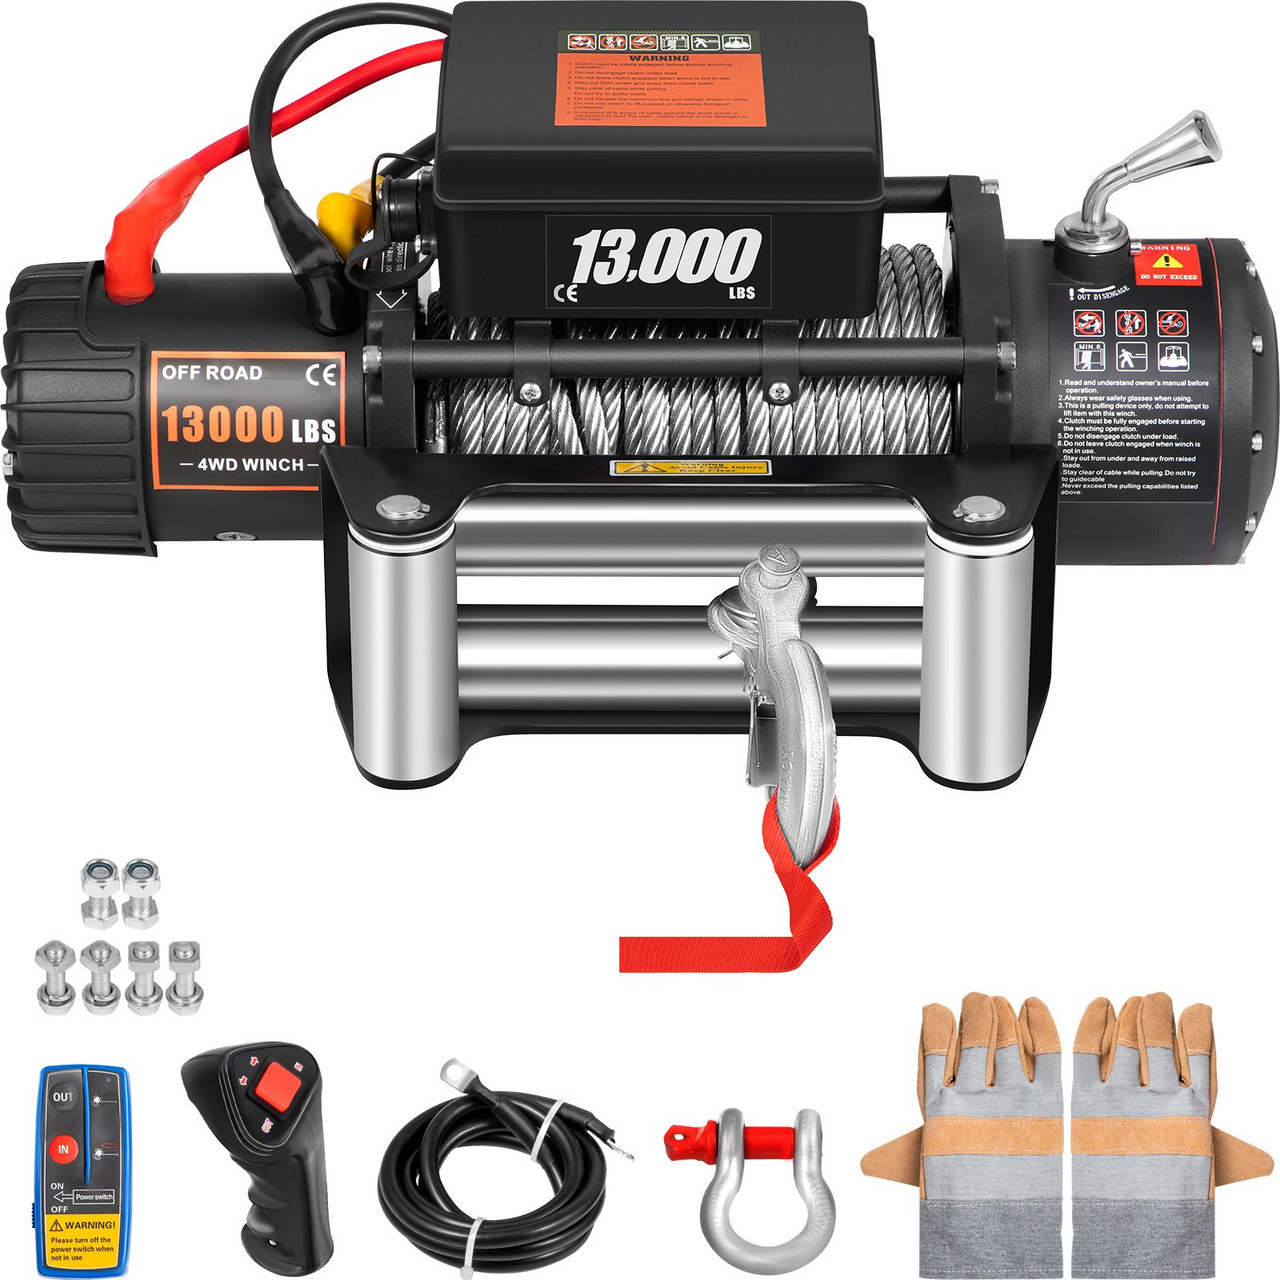 VEVOR Truck Winch 13000lbs Electric Winch 26m/85ft Cable Steel 12V Power Winch Jeep Winch with Wireless Remote Control and Powerful Motor for UTV